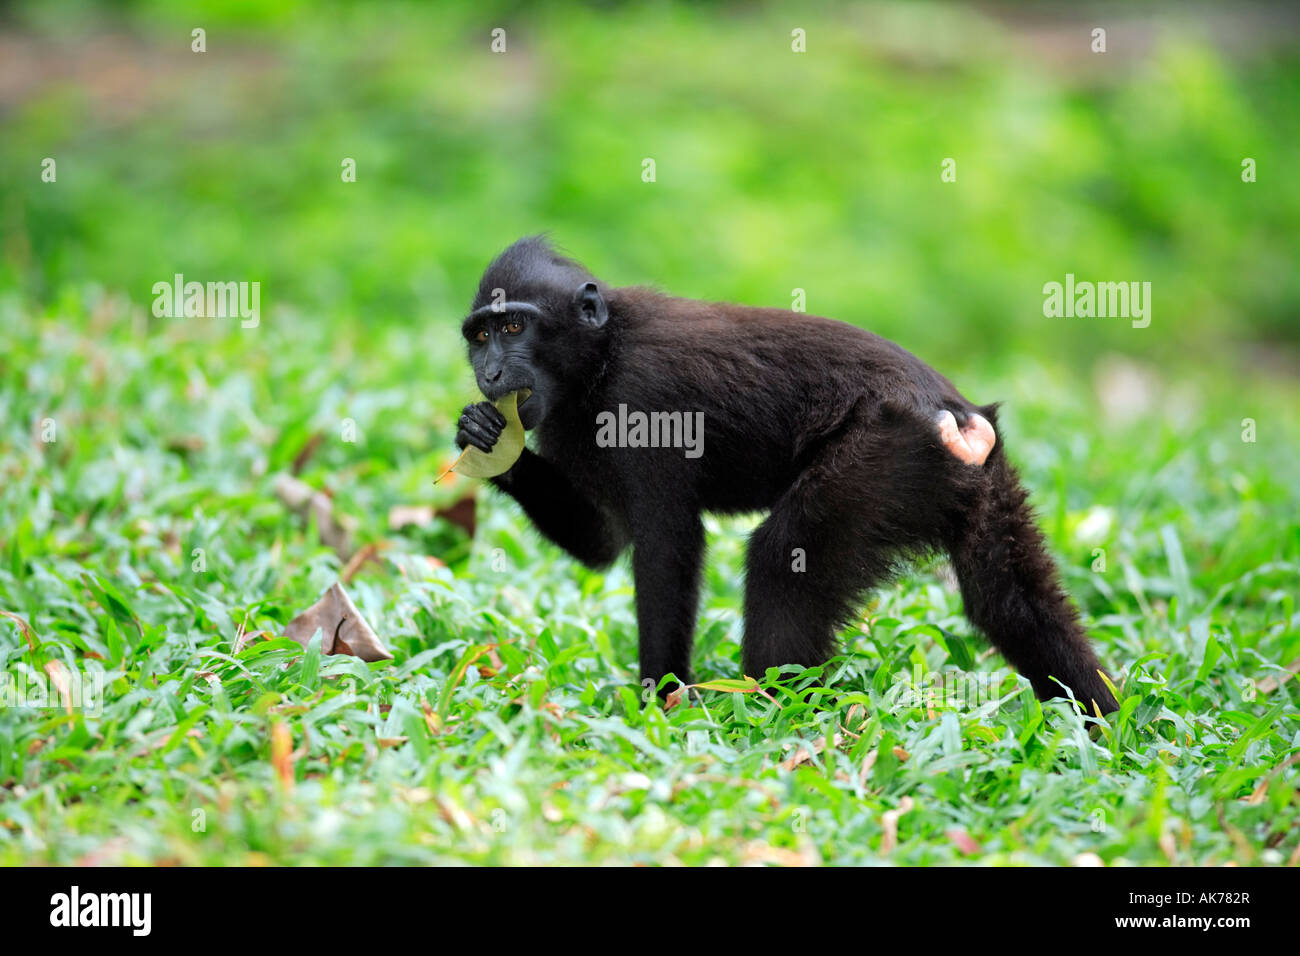 Sulawesi Crested Black Macaque Stock Photo